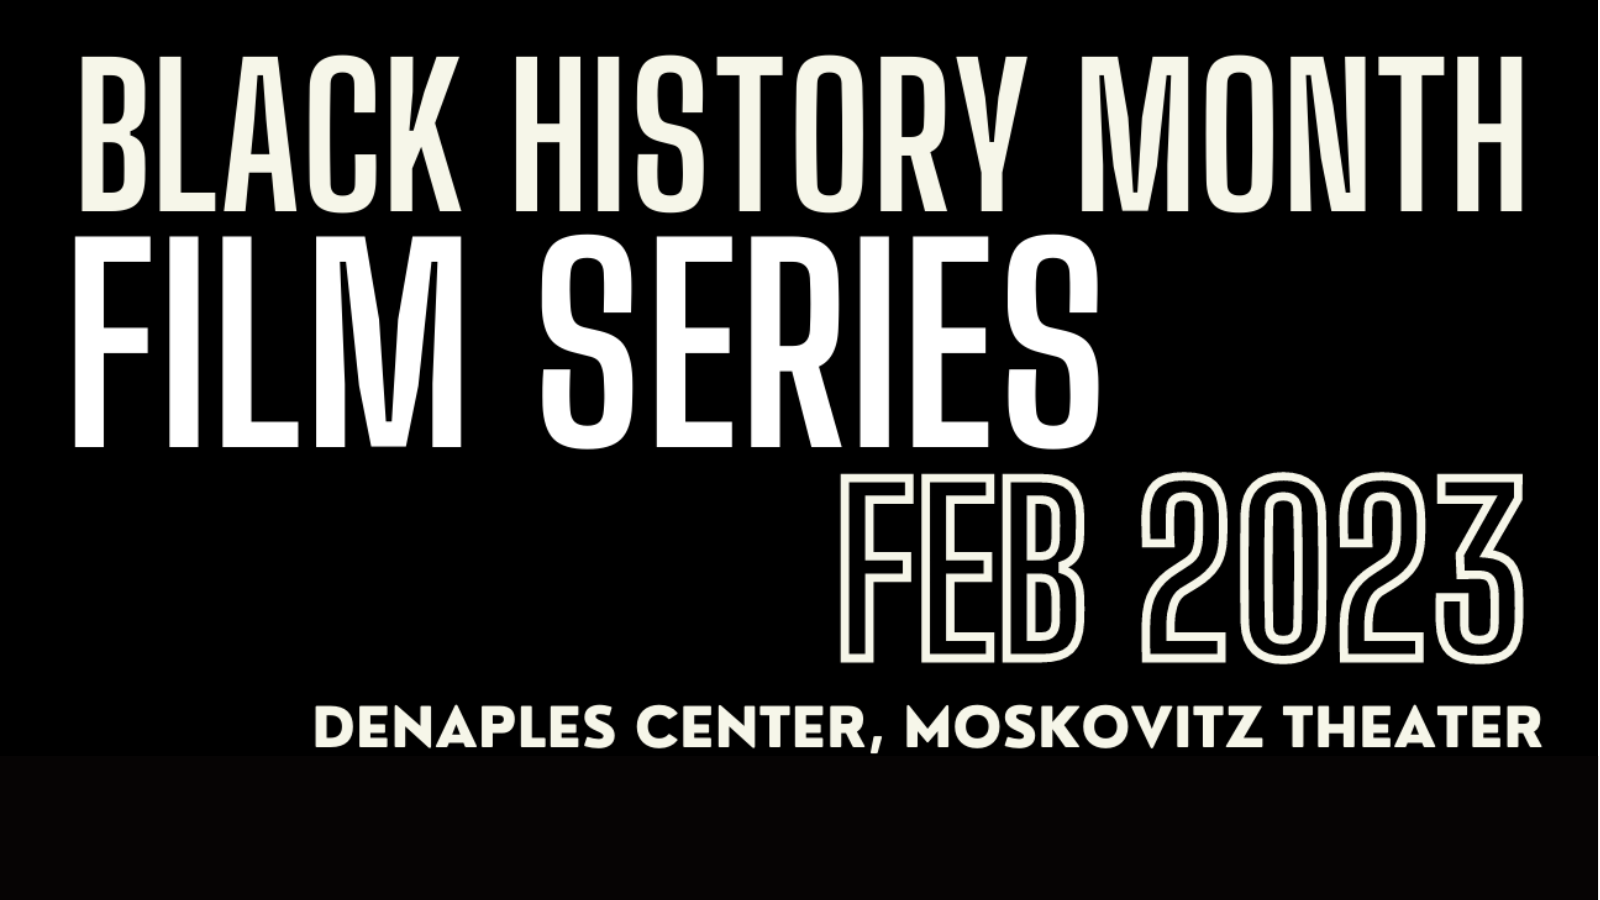 poster announcing Black History Month Film Series